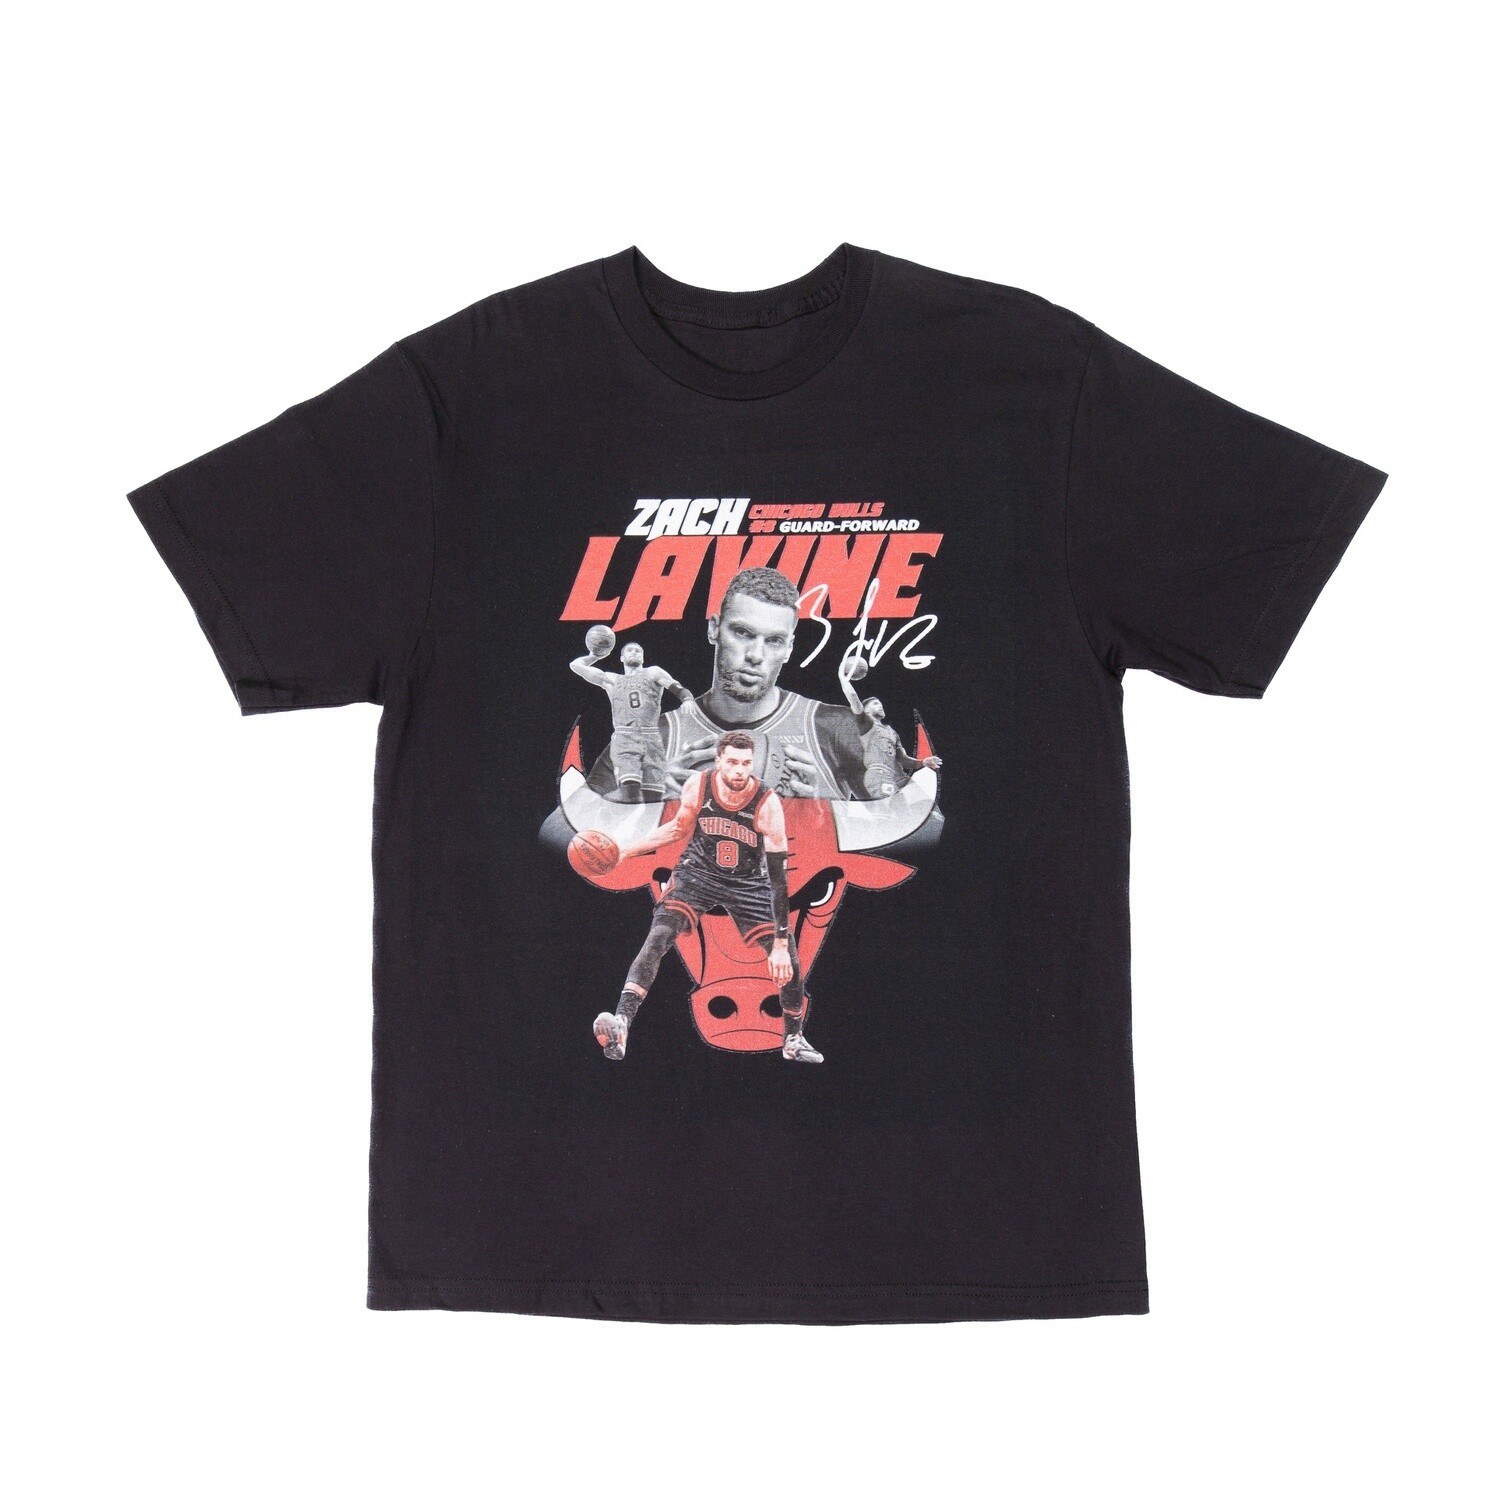 T-shirt Ghost Country Zach Lavine, Colour: Black, Size: Small